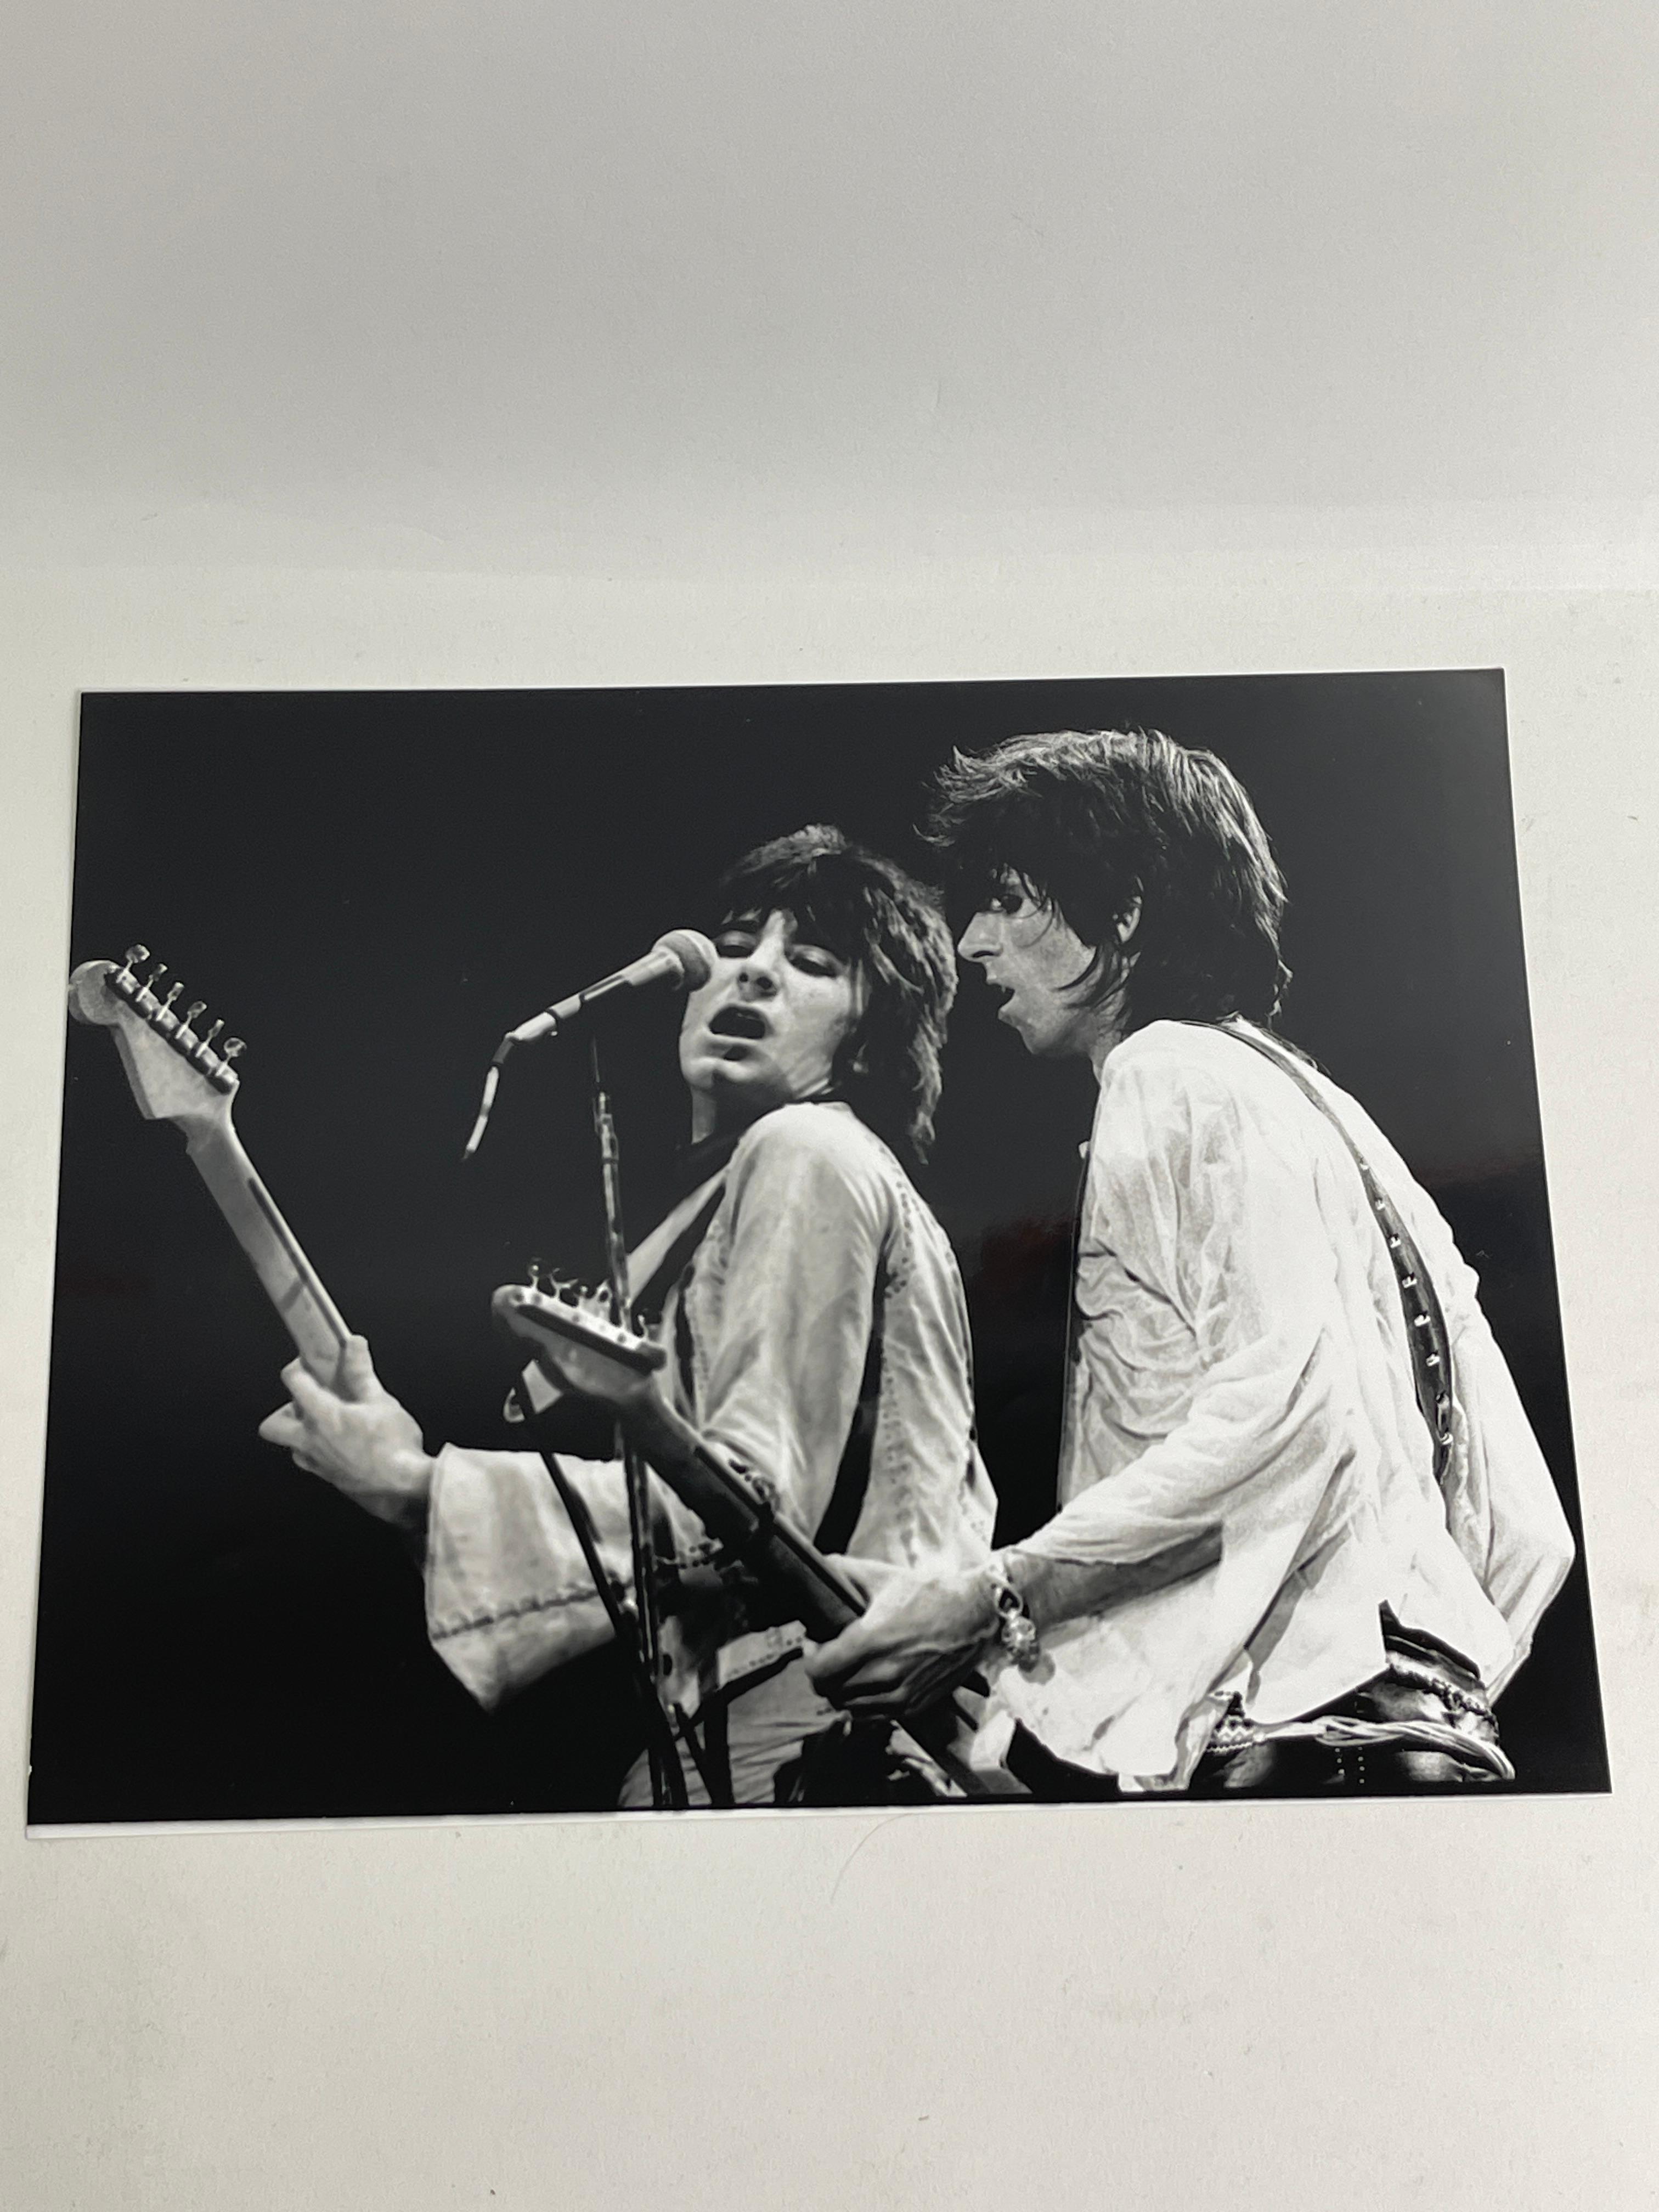 ORIGINAL BLACK AND WHITE PHOTOGRAPHY MICK JAGGER KEITH RICHARDS ROLLING STONES